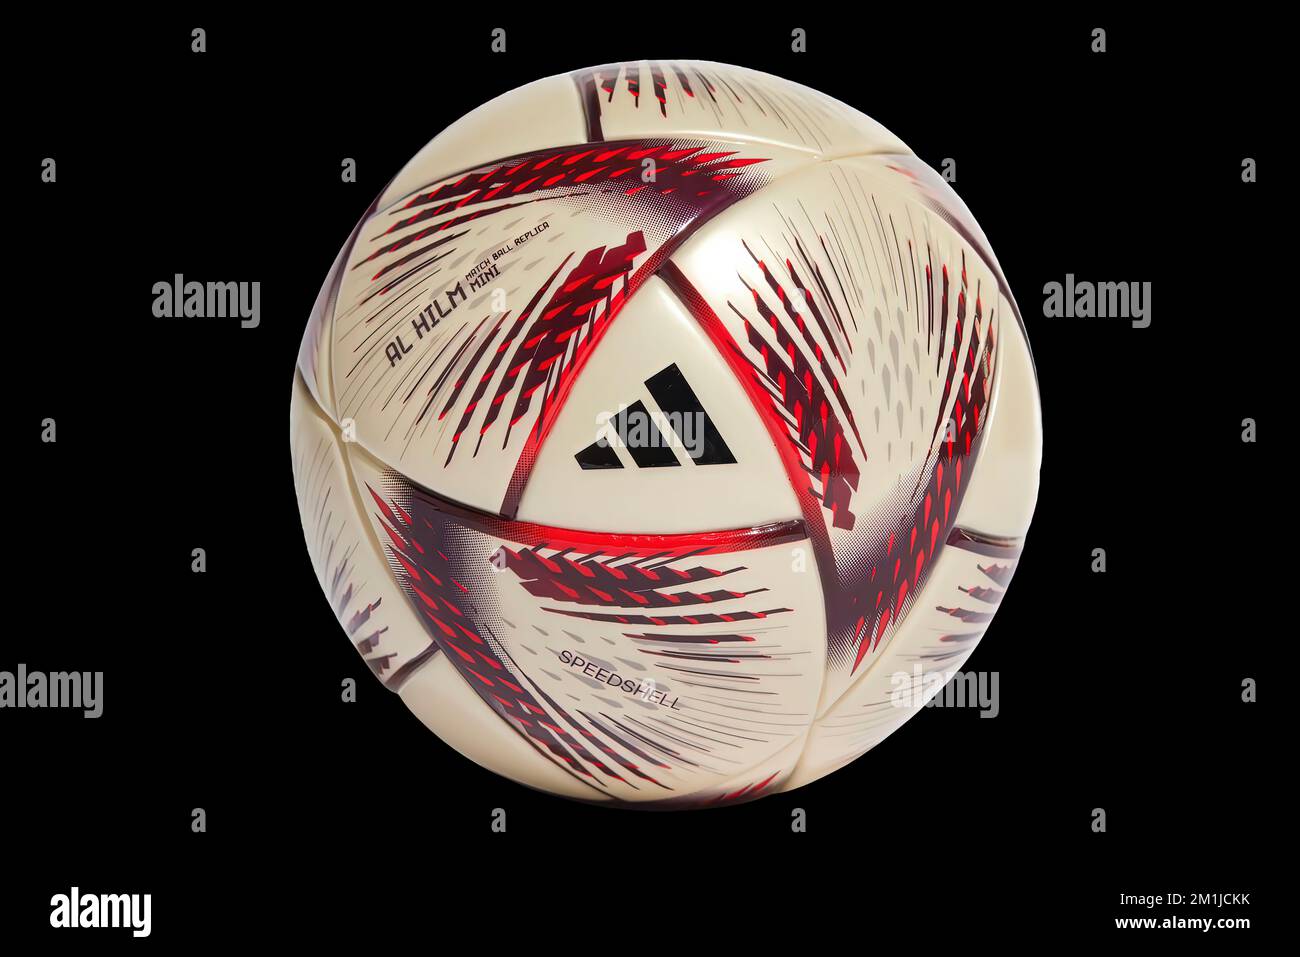 Lusail, Qatar. Dec 12, 2022. An adidas Al Hilm mini soccer ball. An official replica match ball used in the FIFA World Cup semi-finals and final match Stock Photo